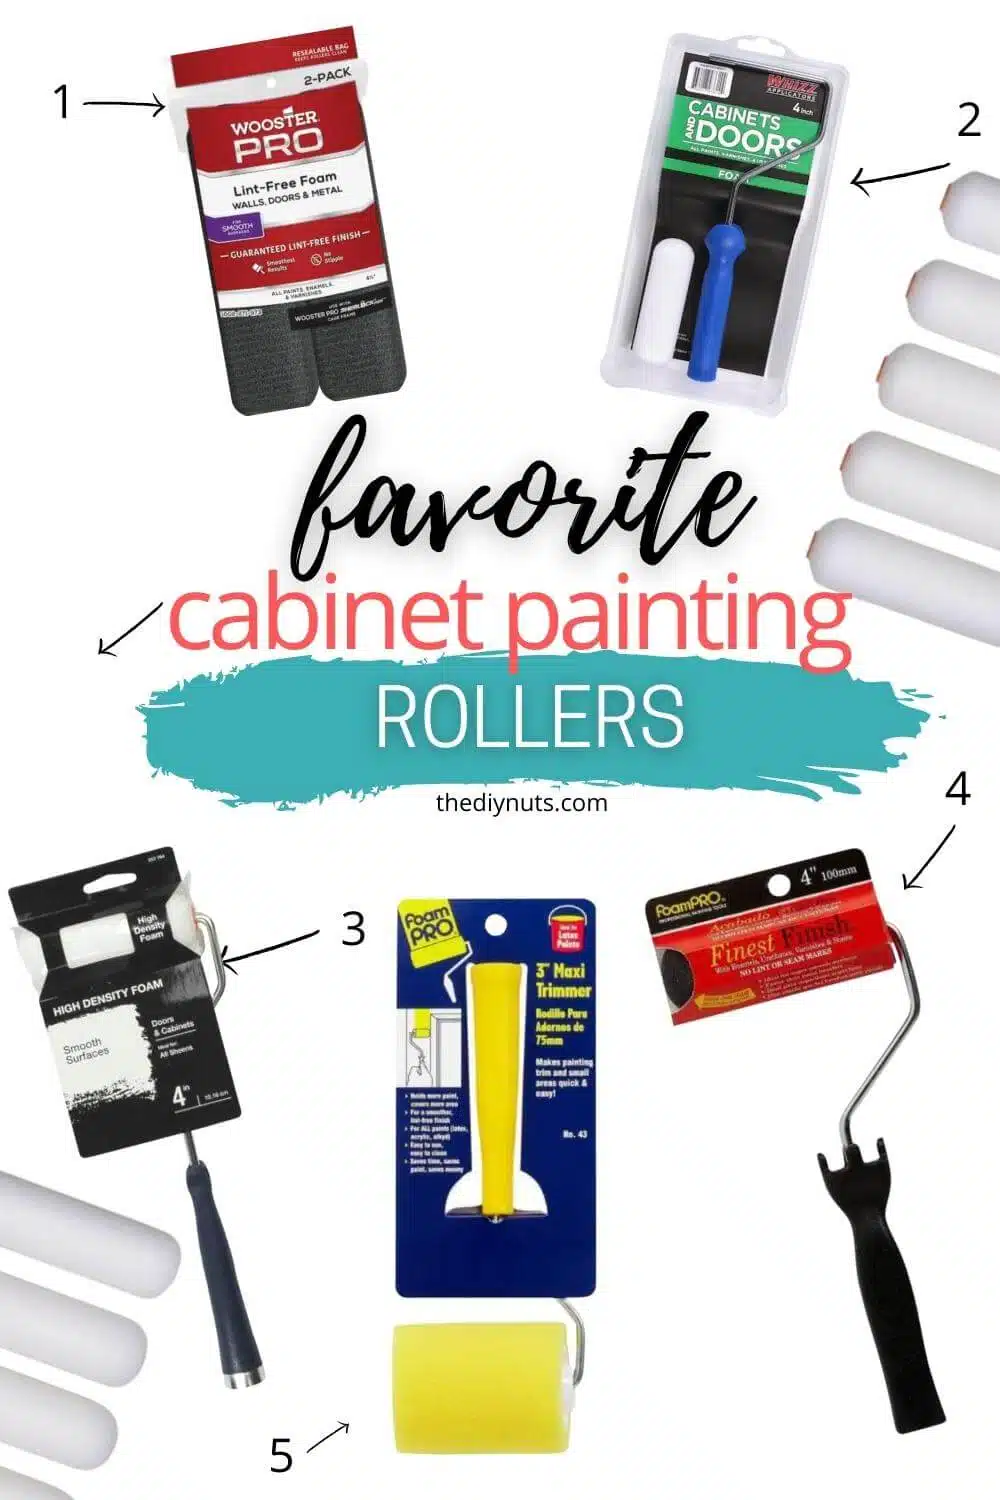 favorite cabinet painting rollers with images of rollers